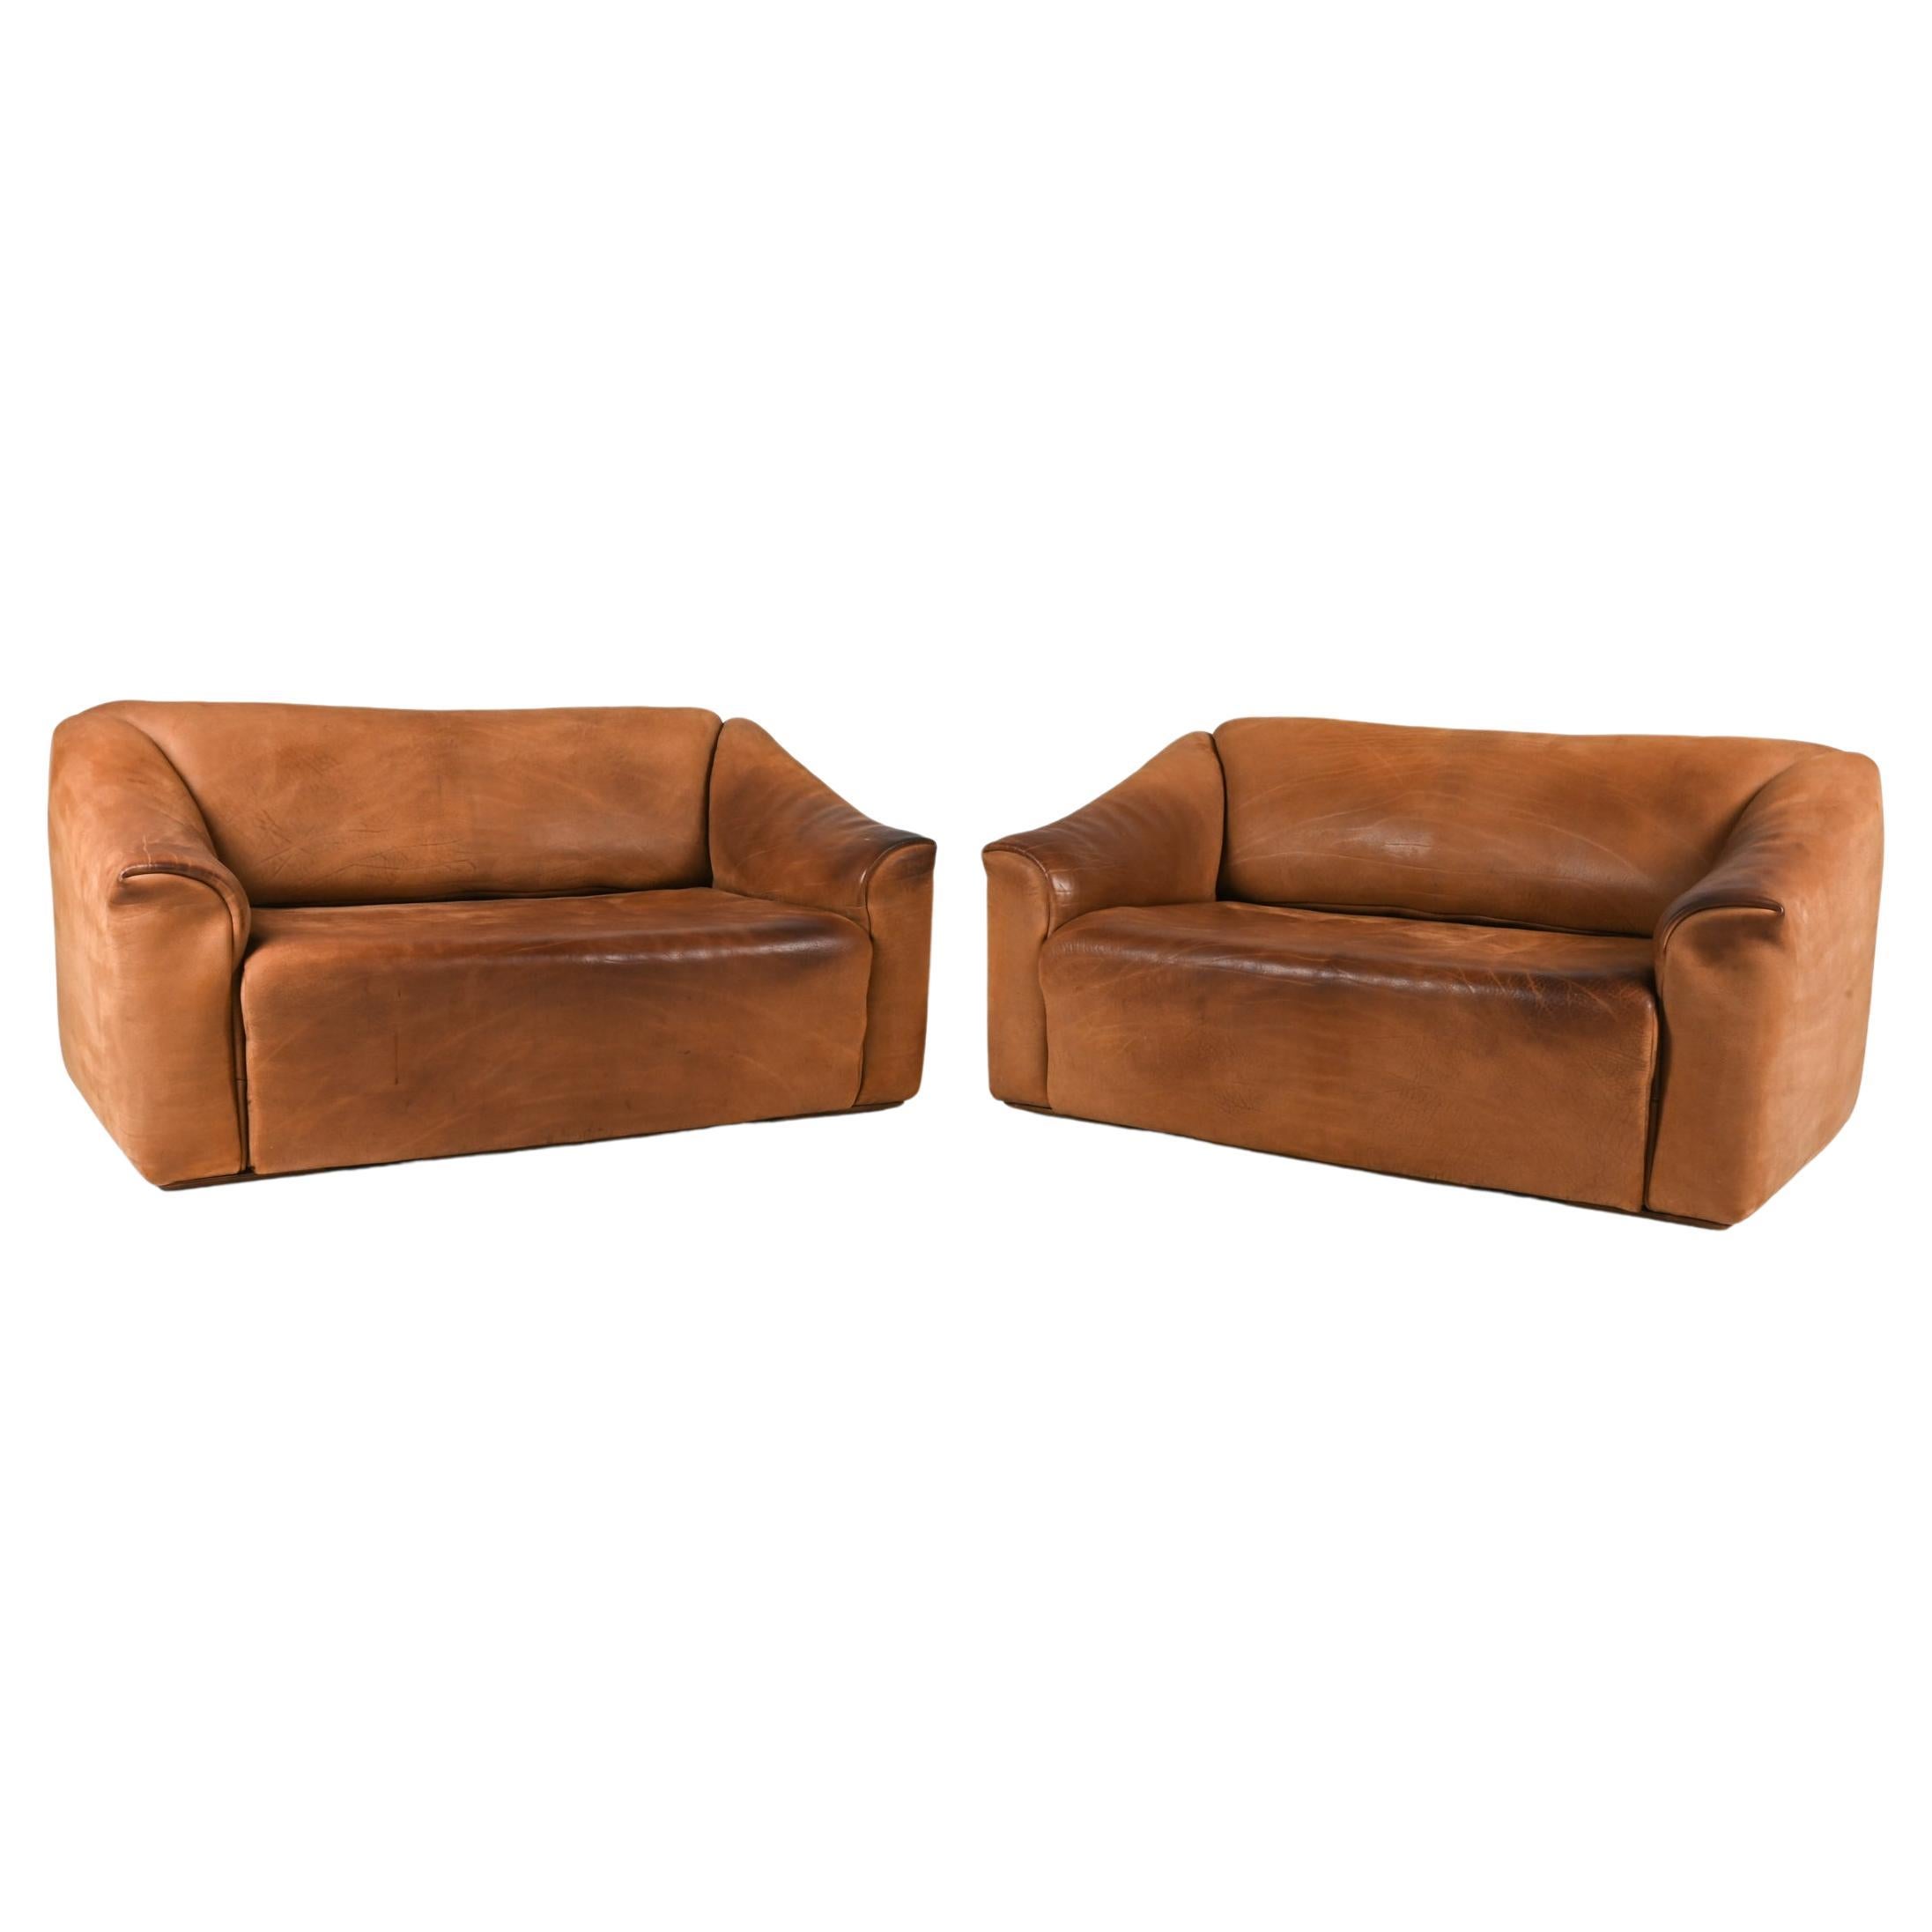 Pair of De Sede DS-47 Two-Seat Sofas in Nubuck Leather, c. 1970's For Sale